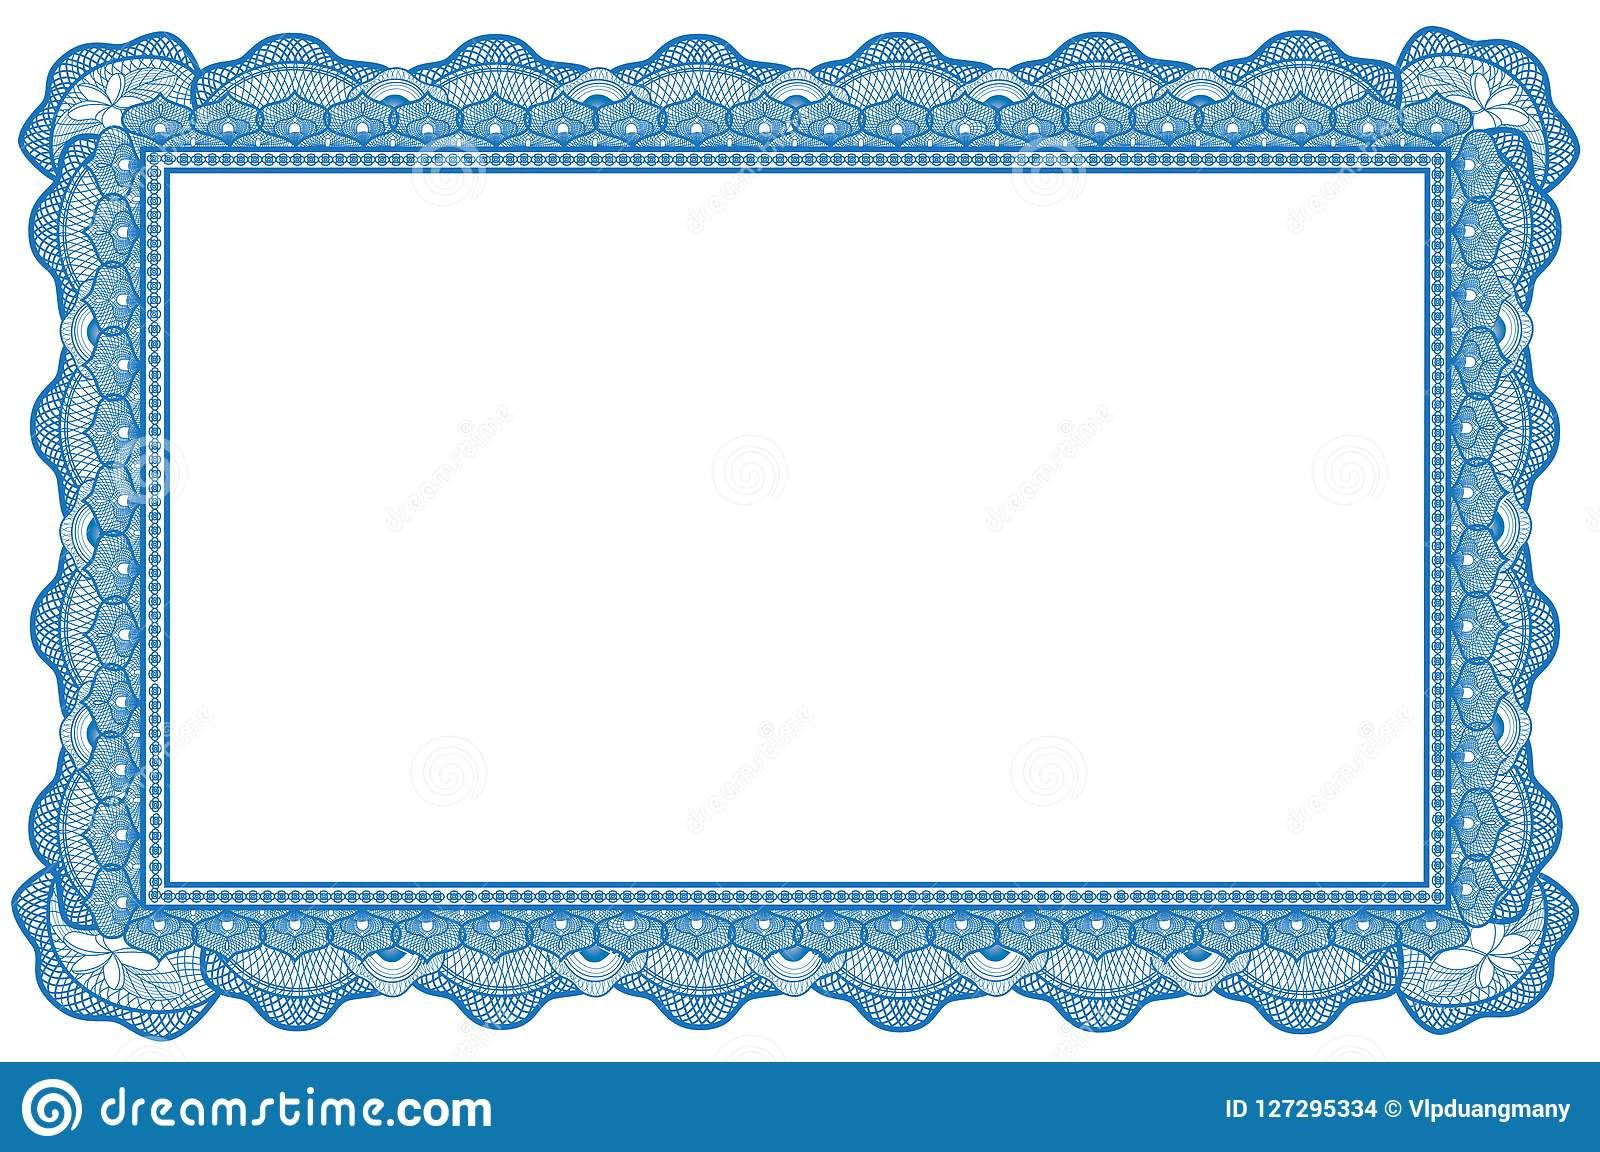 Certificate Border Template 10 Stock Illustration - Illustration of  Throughout Free Printable Certificate Border Templates